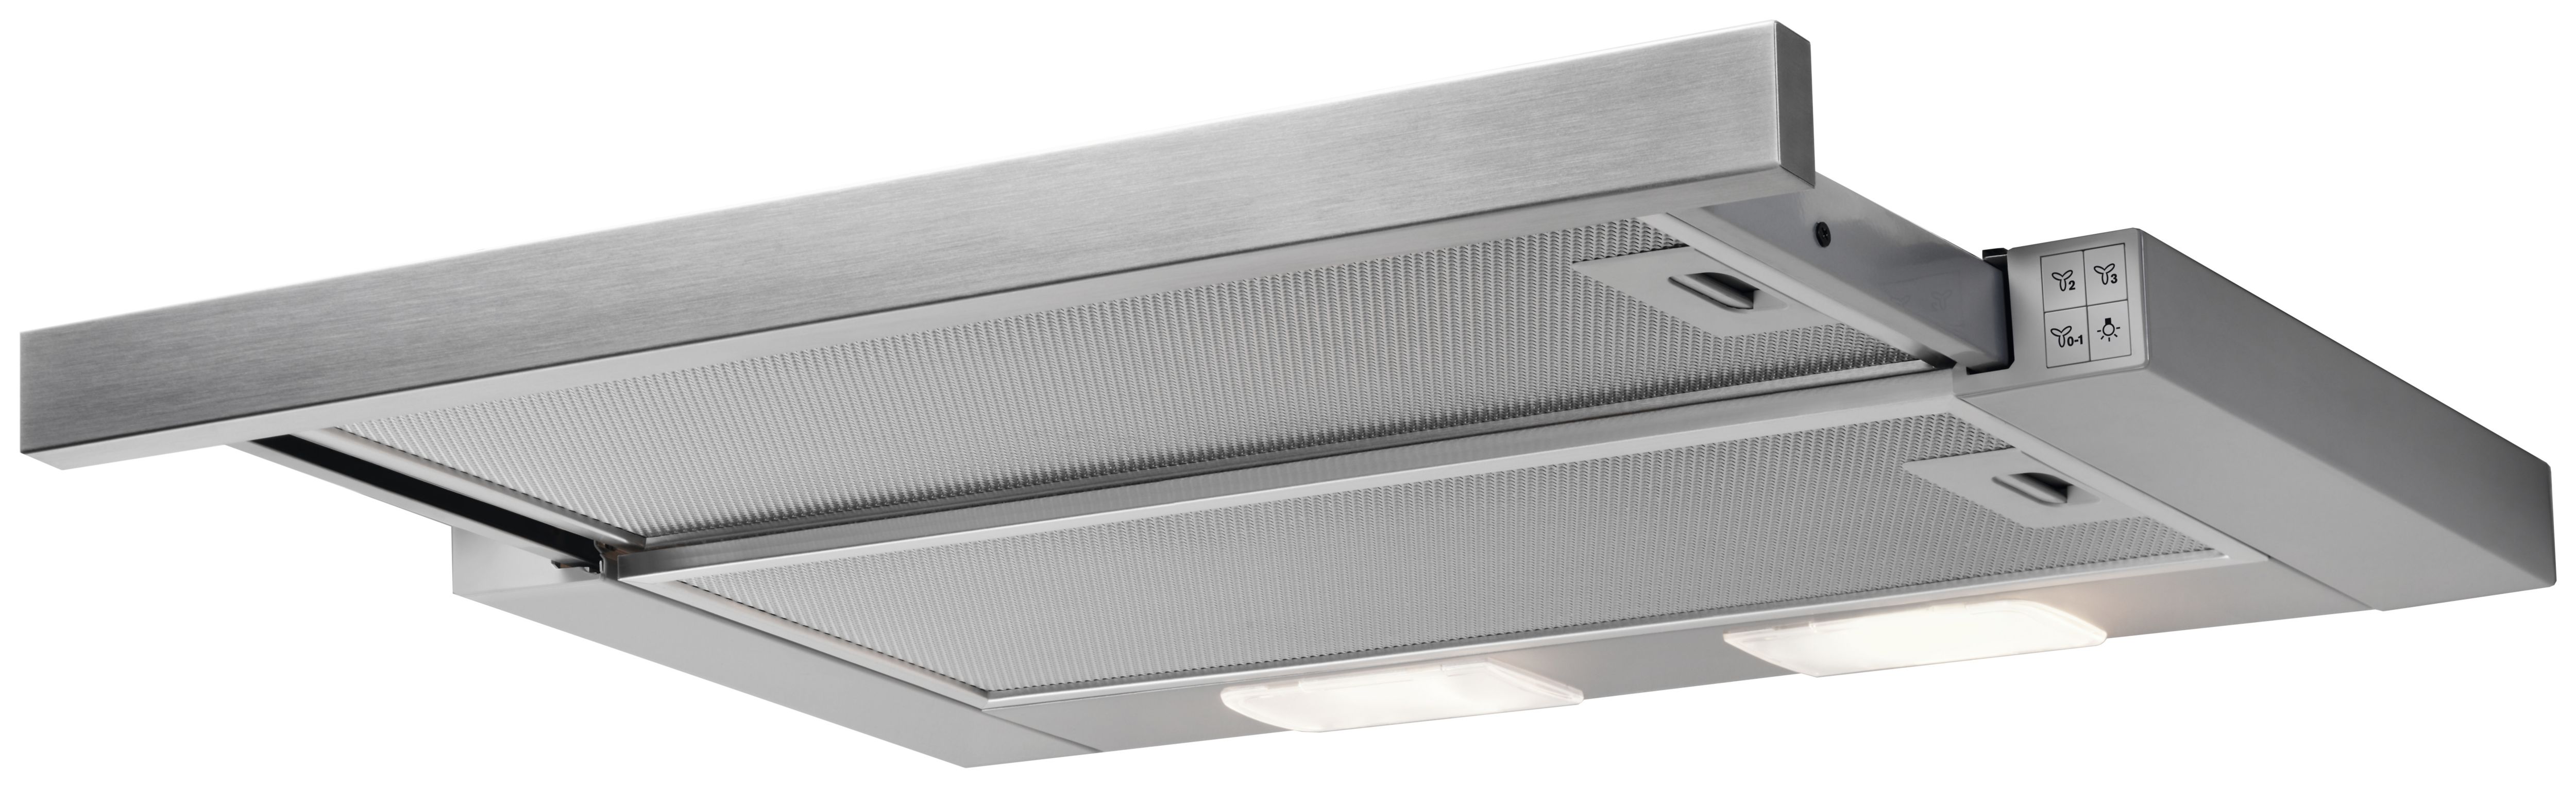 Image of Zanussi ZFP316S 60cm Pull-Out Cooker Hood - Silver Grey